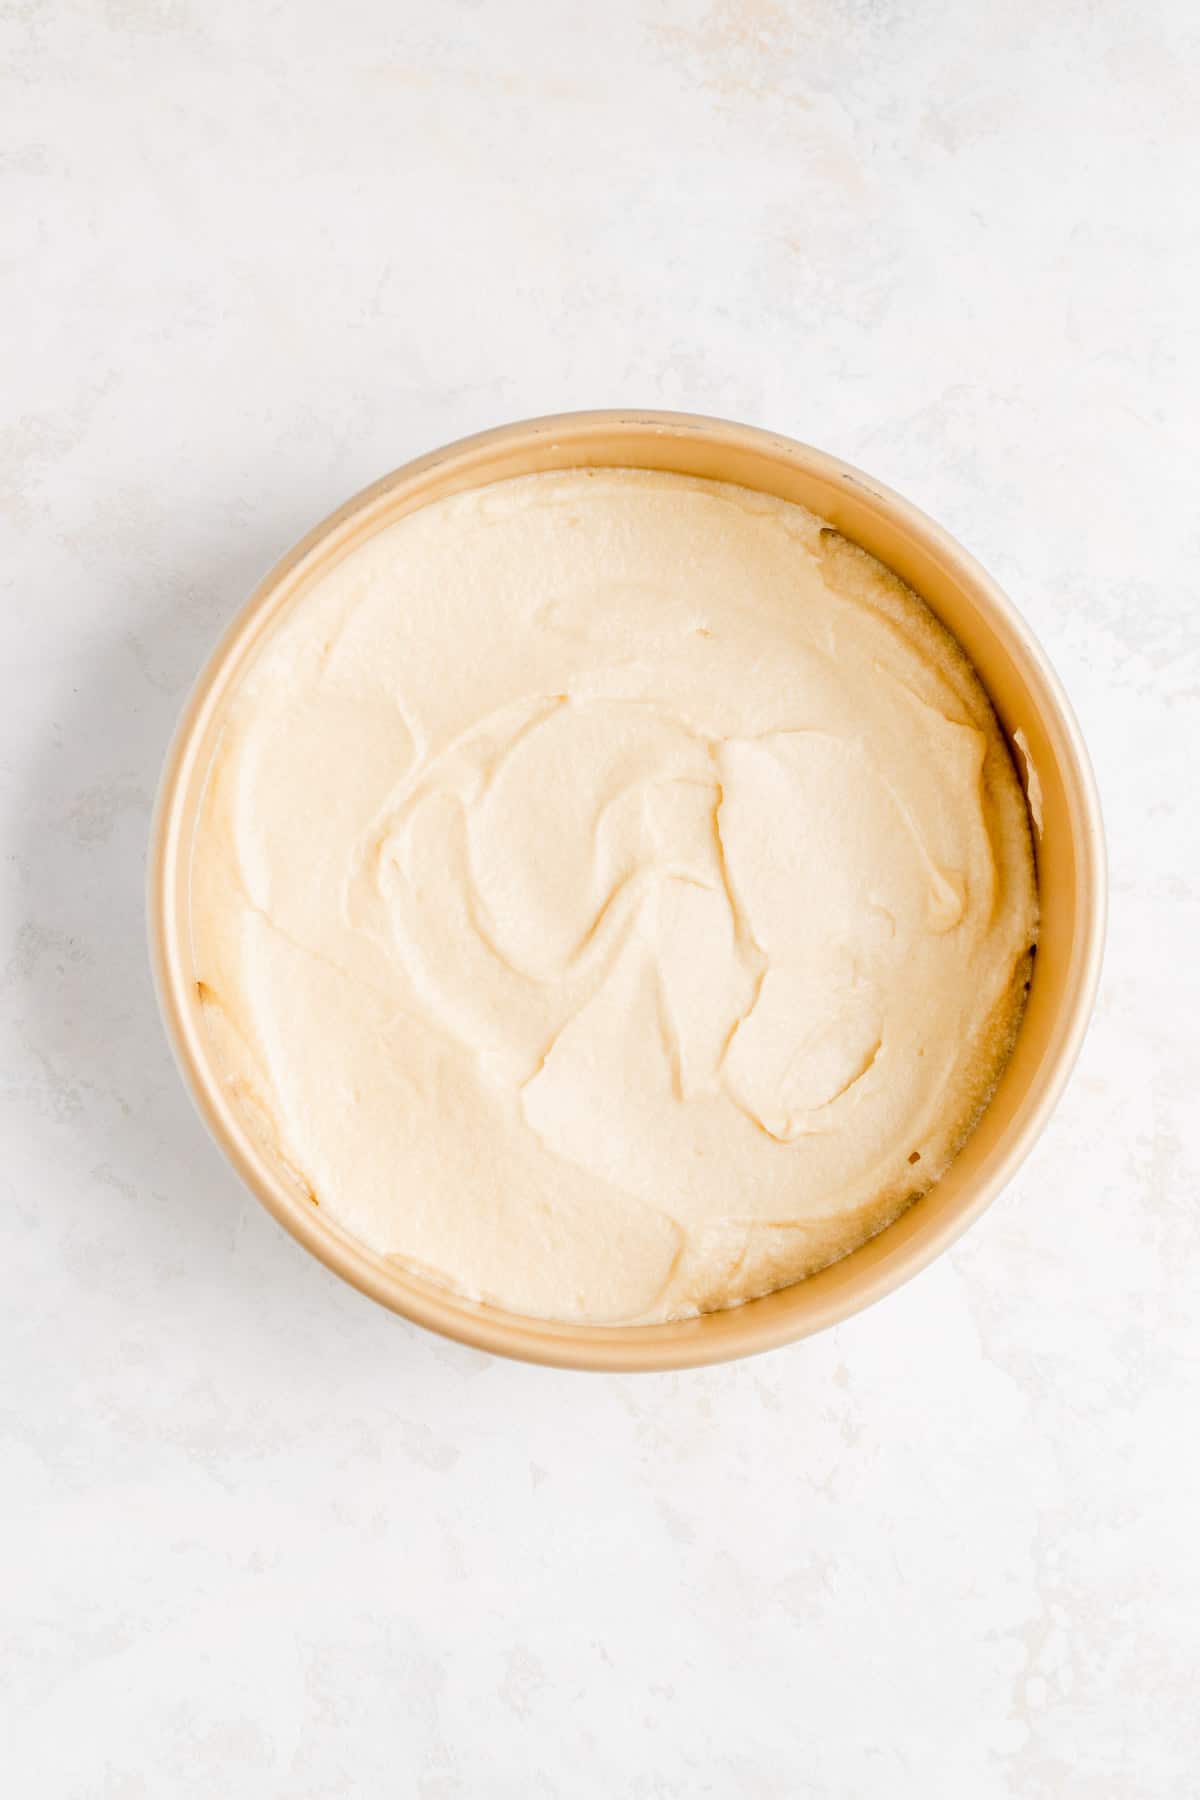 raw cake batter in a gold cake pan on a white background